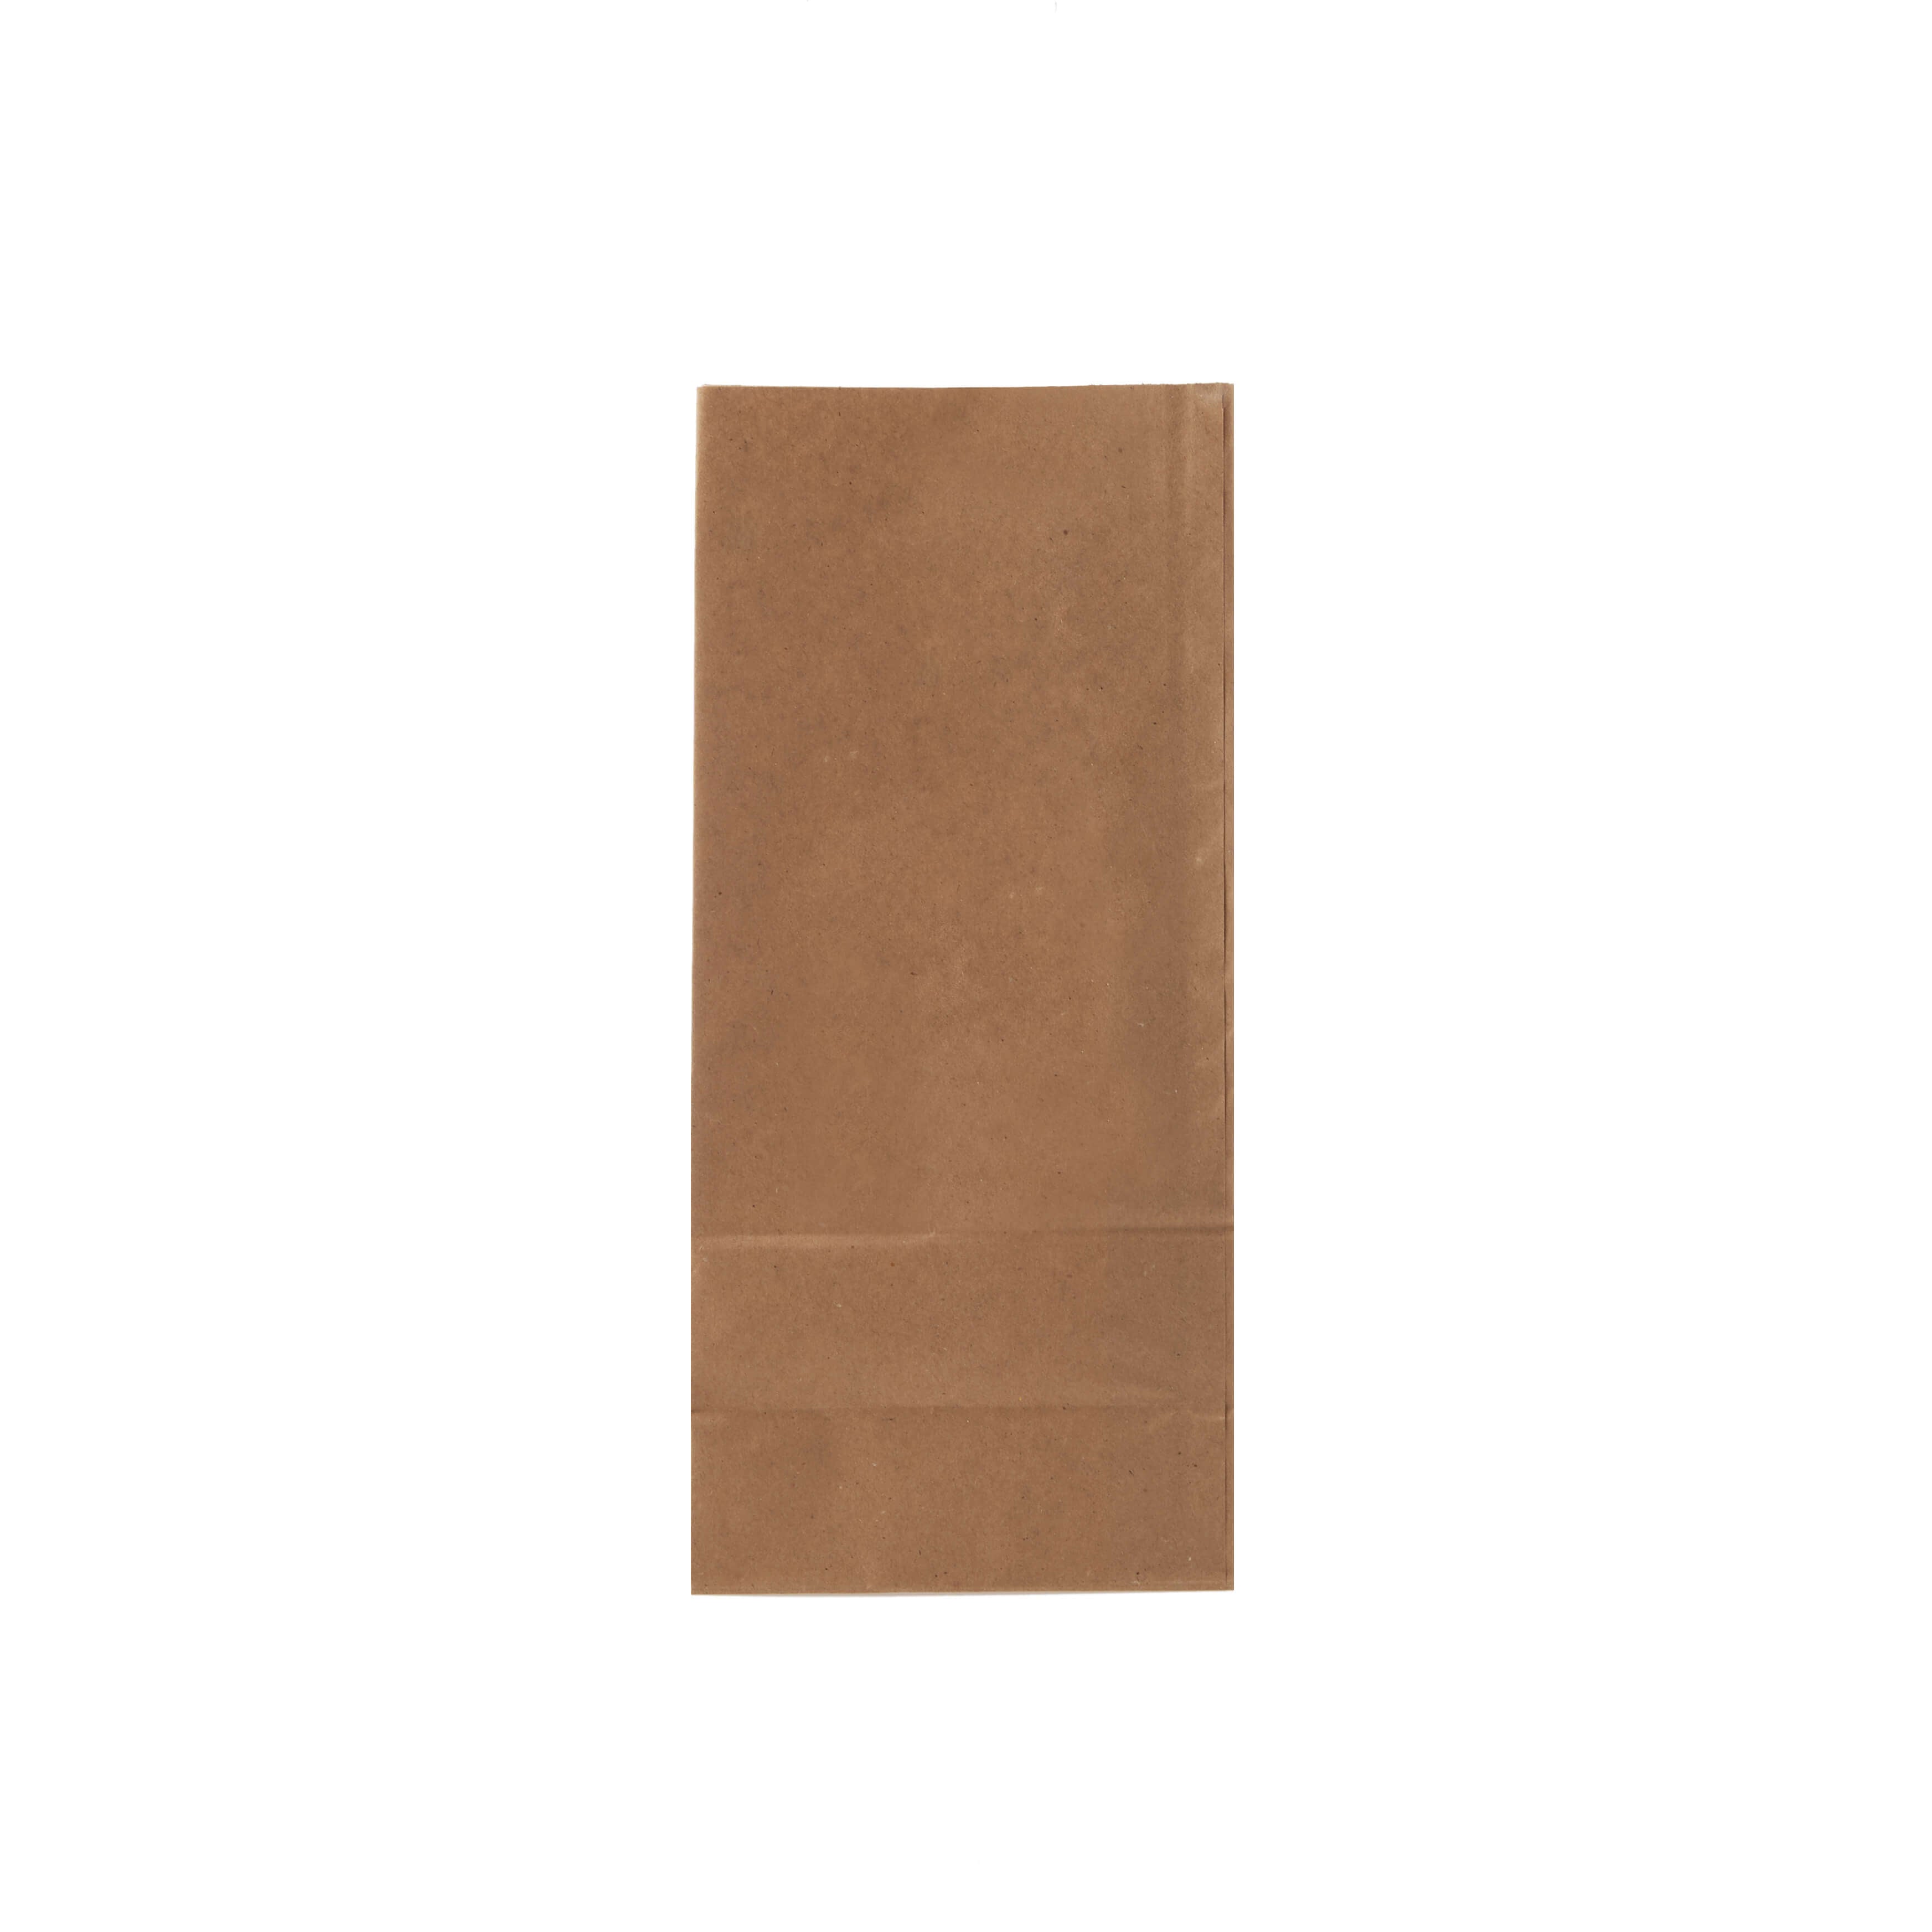 15 x 33 cm Square or Flat Bottom Paper Bags - Hotpack Global